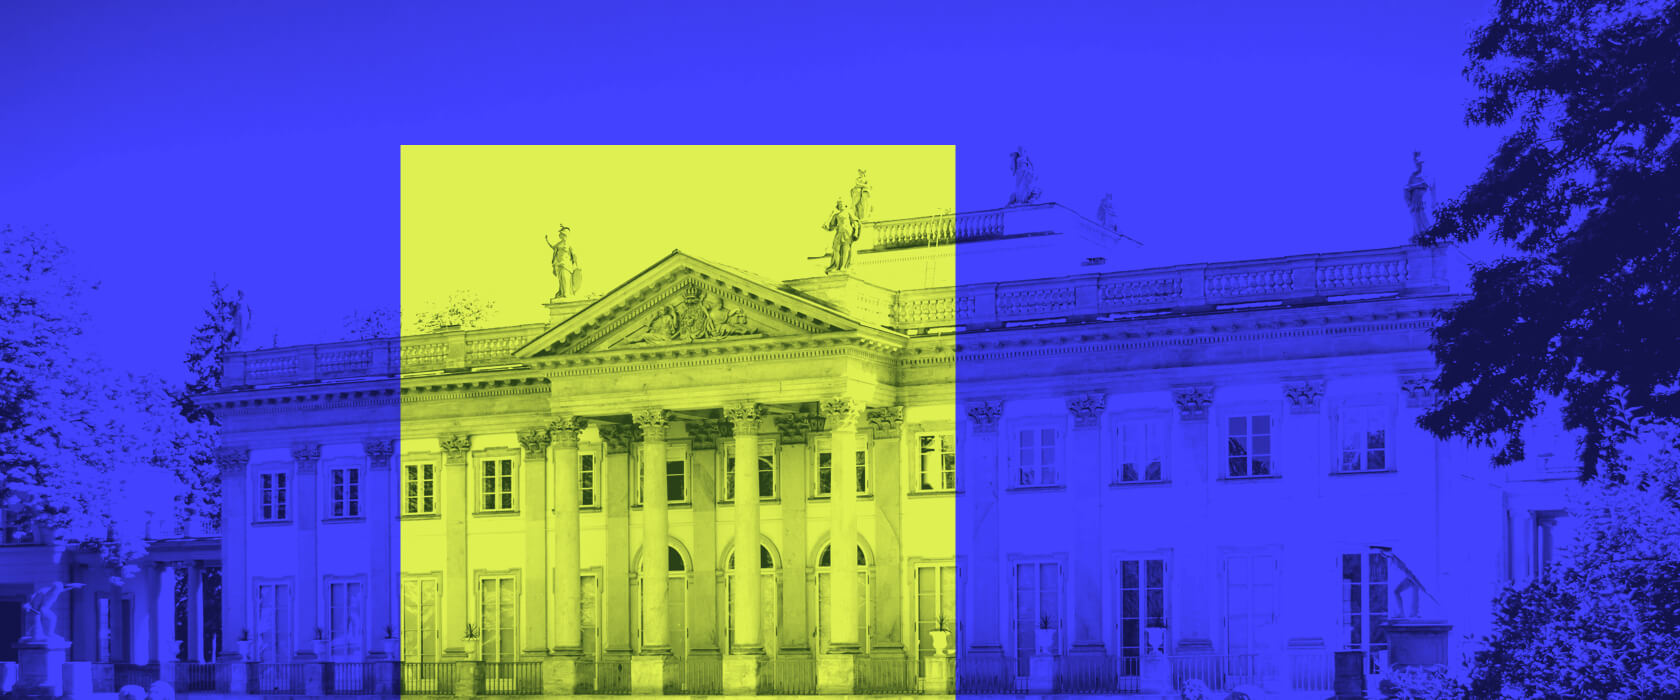 A photo of the Łazienki Palace in Warsaw processed with color overlays.